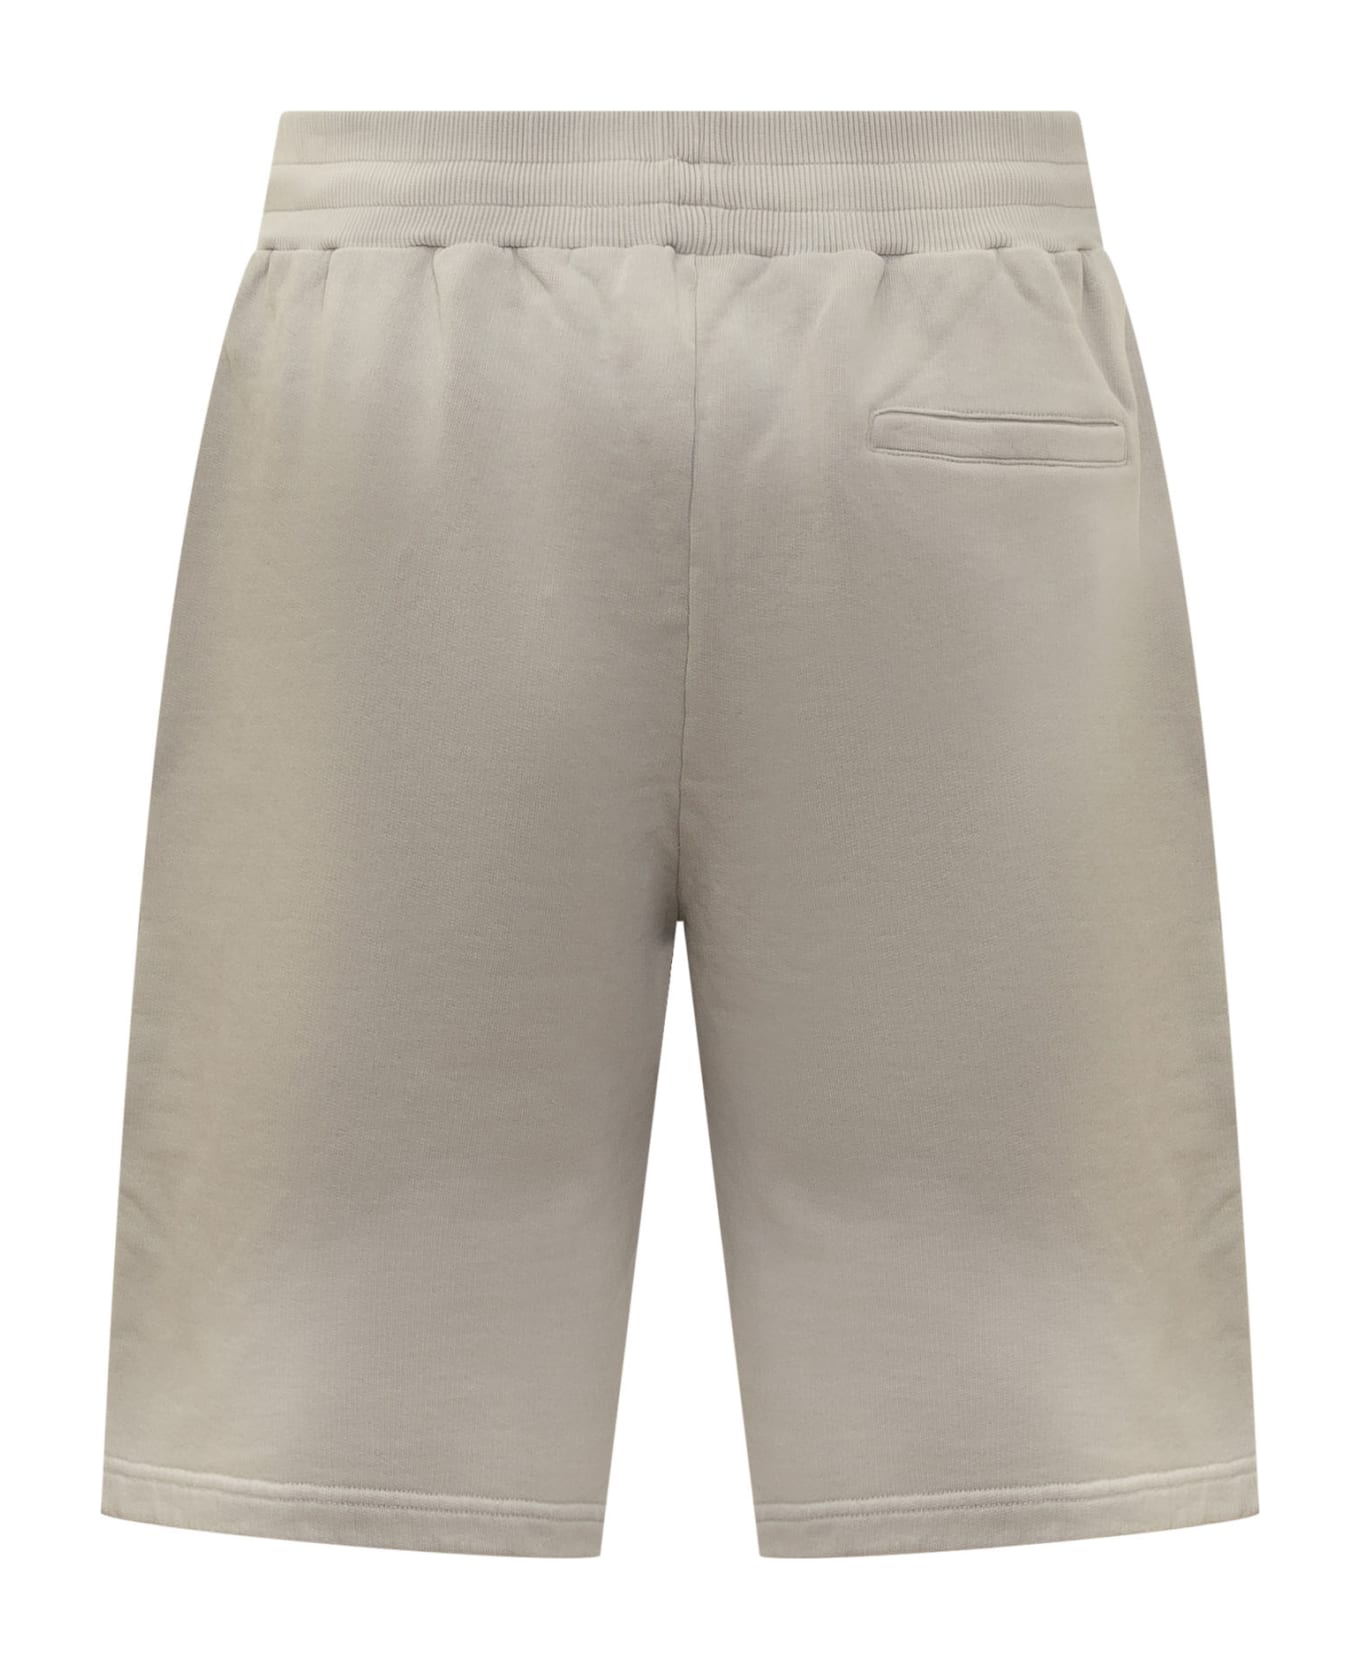 A-COLD-WALL Gradient Jersey Shorts - LIGHT GREY